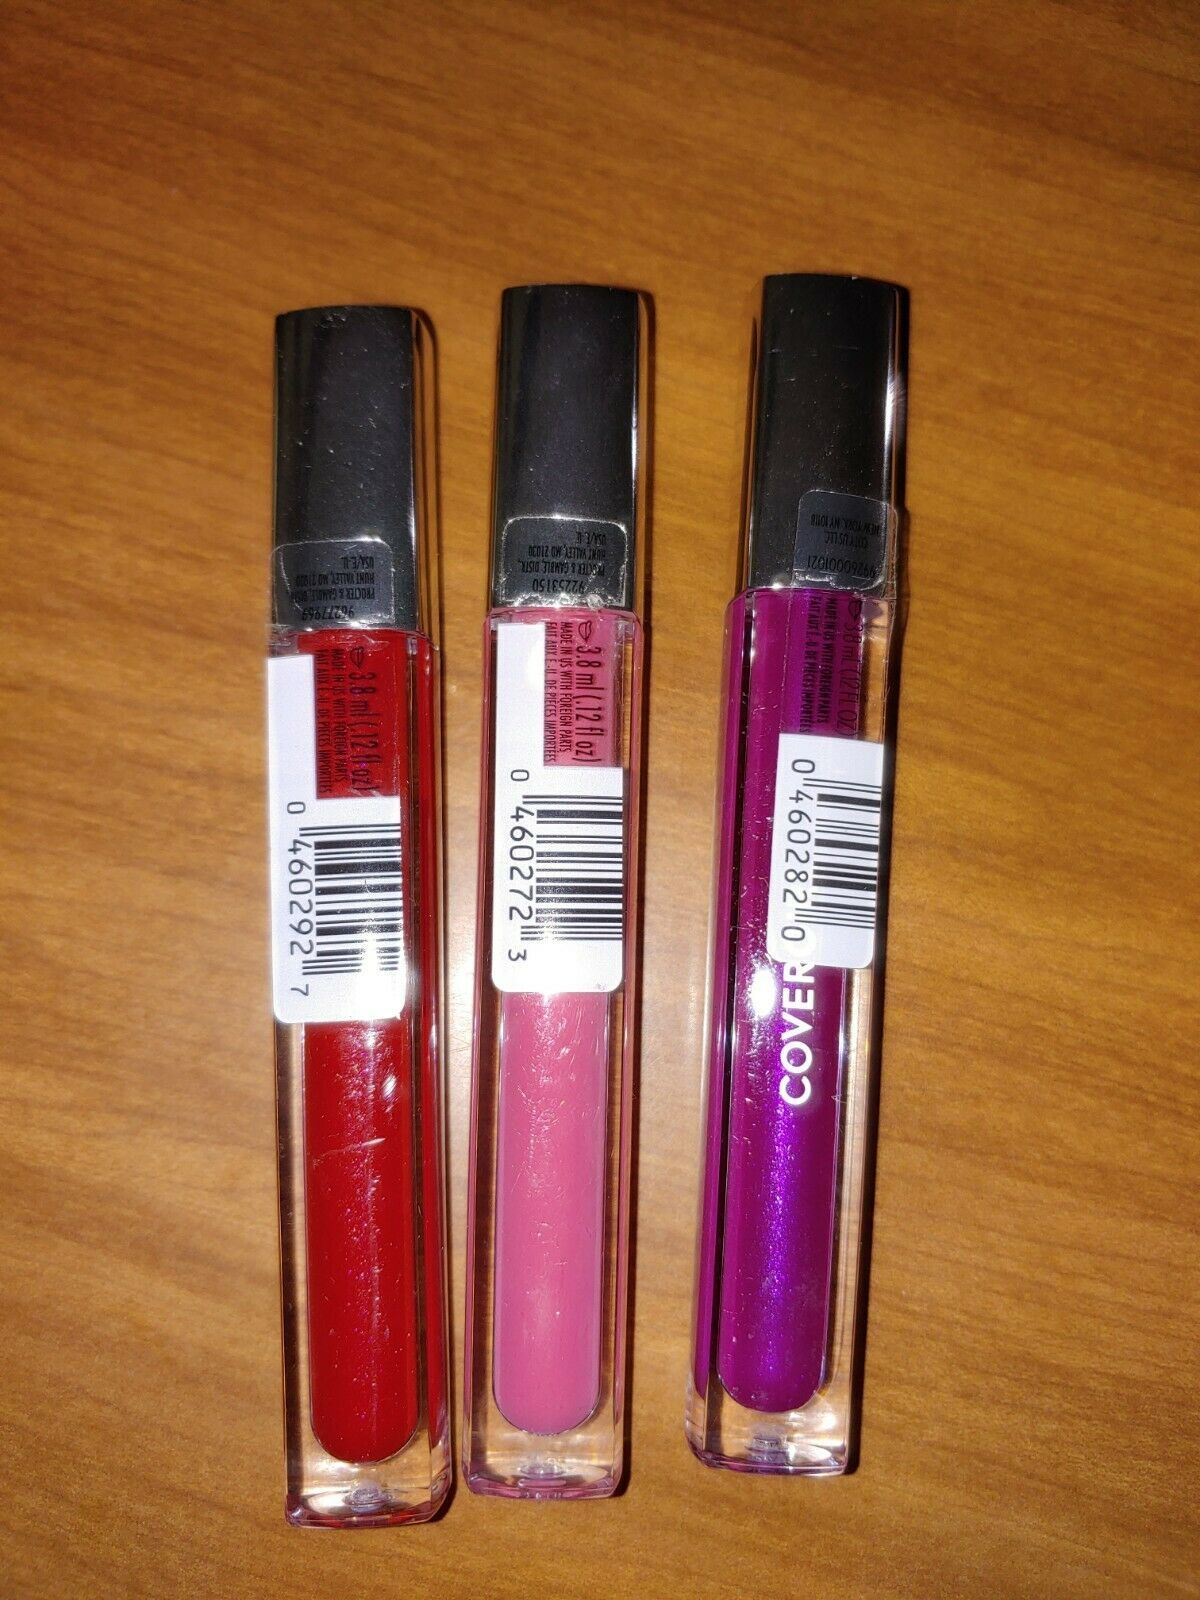 Primary image for CoverGirl Colorlicious Lip Gloss set #680 sweet strawberry #700 whipped berry